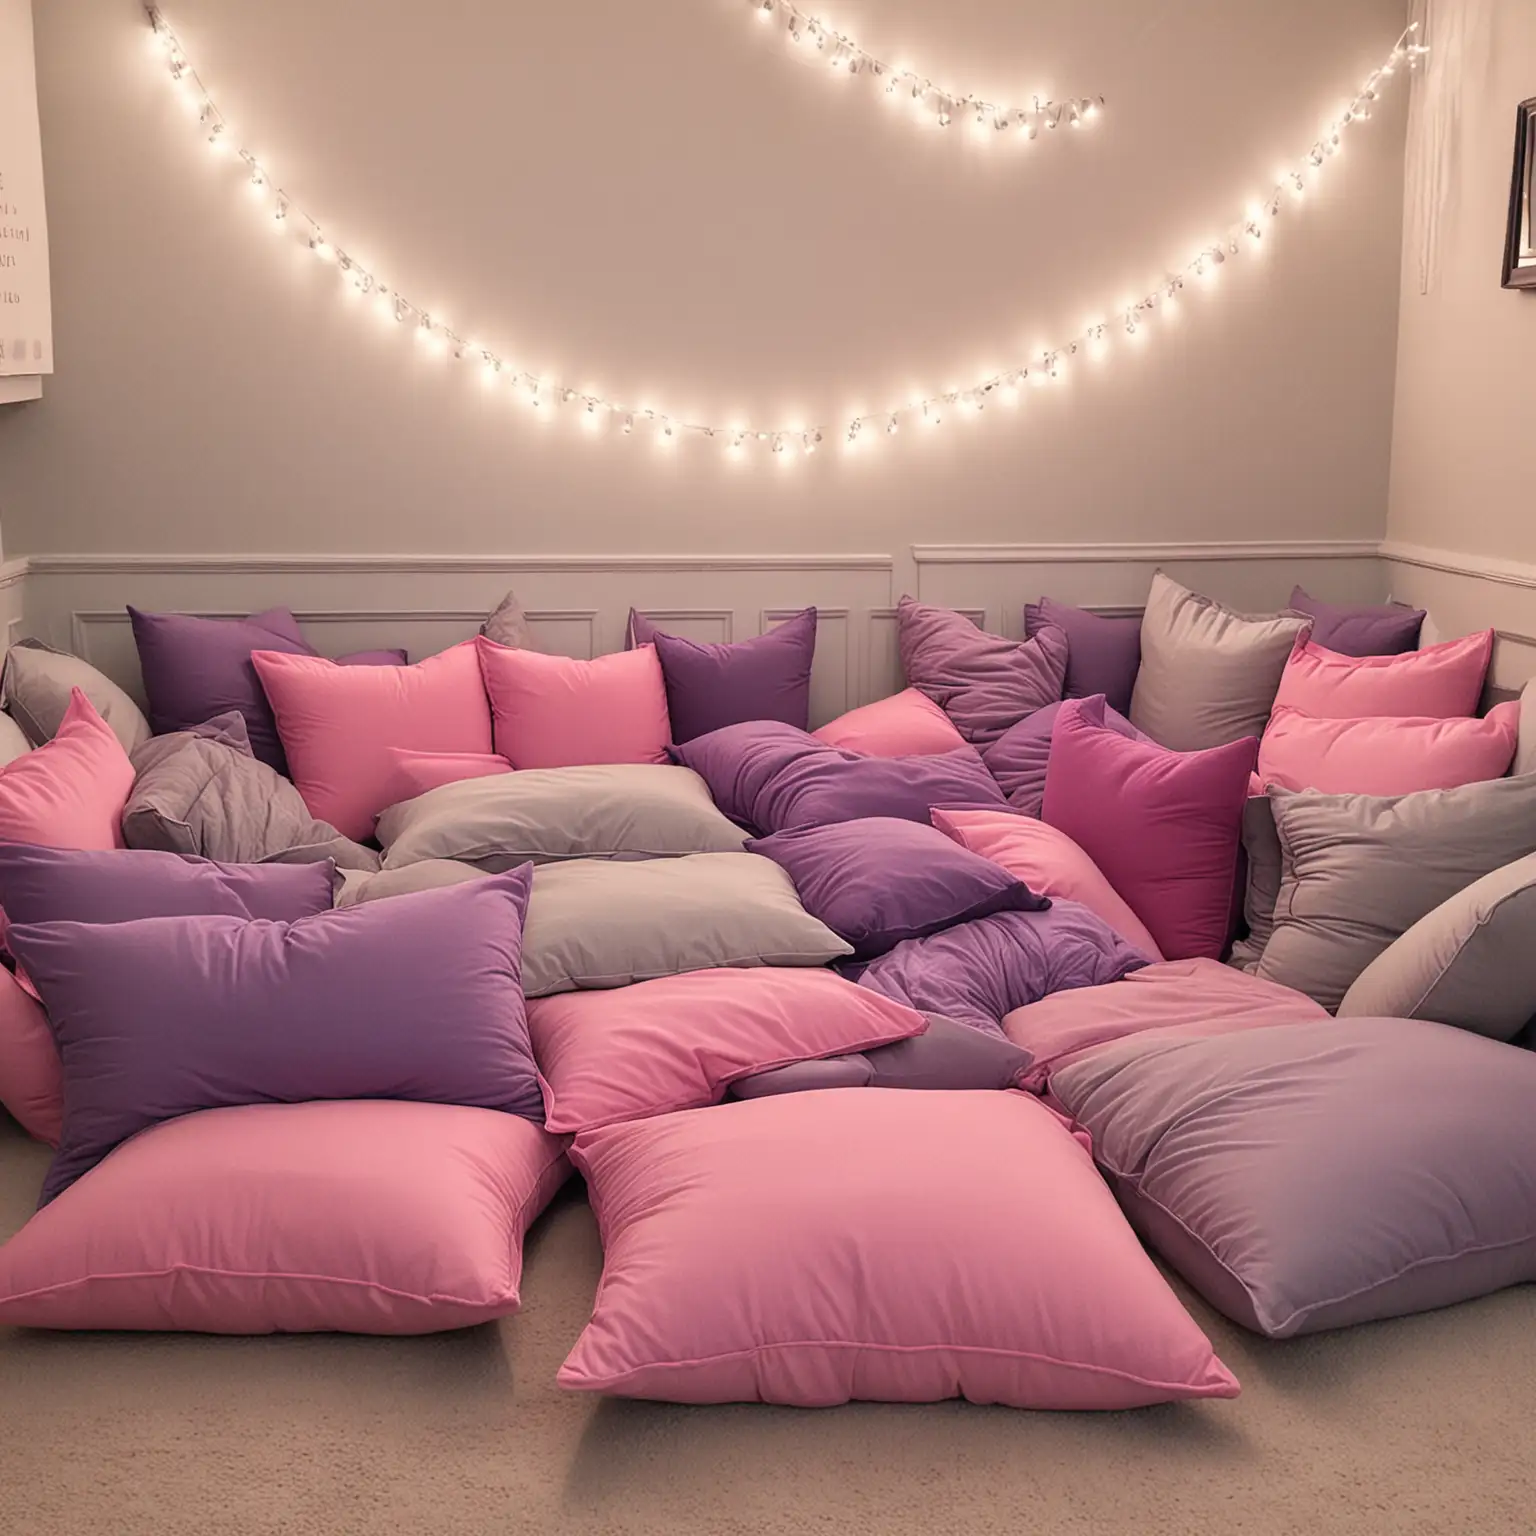 Cozy Pink and Purple Pillow Fort for Imaginative Adventures